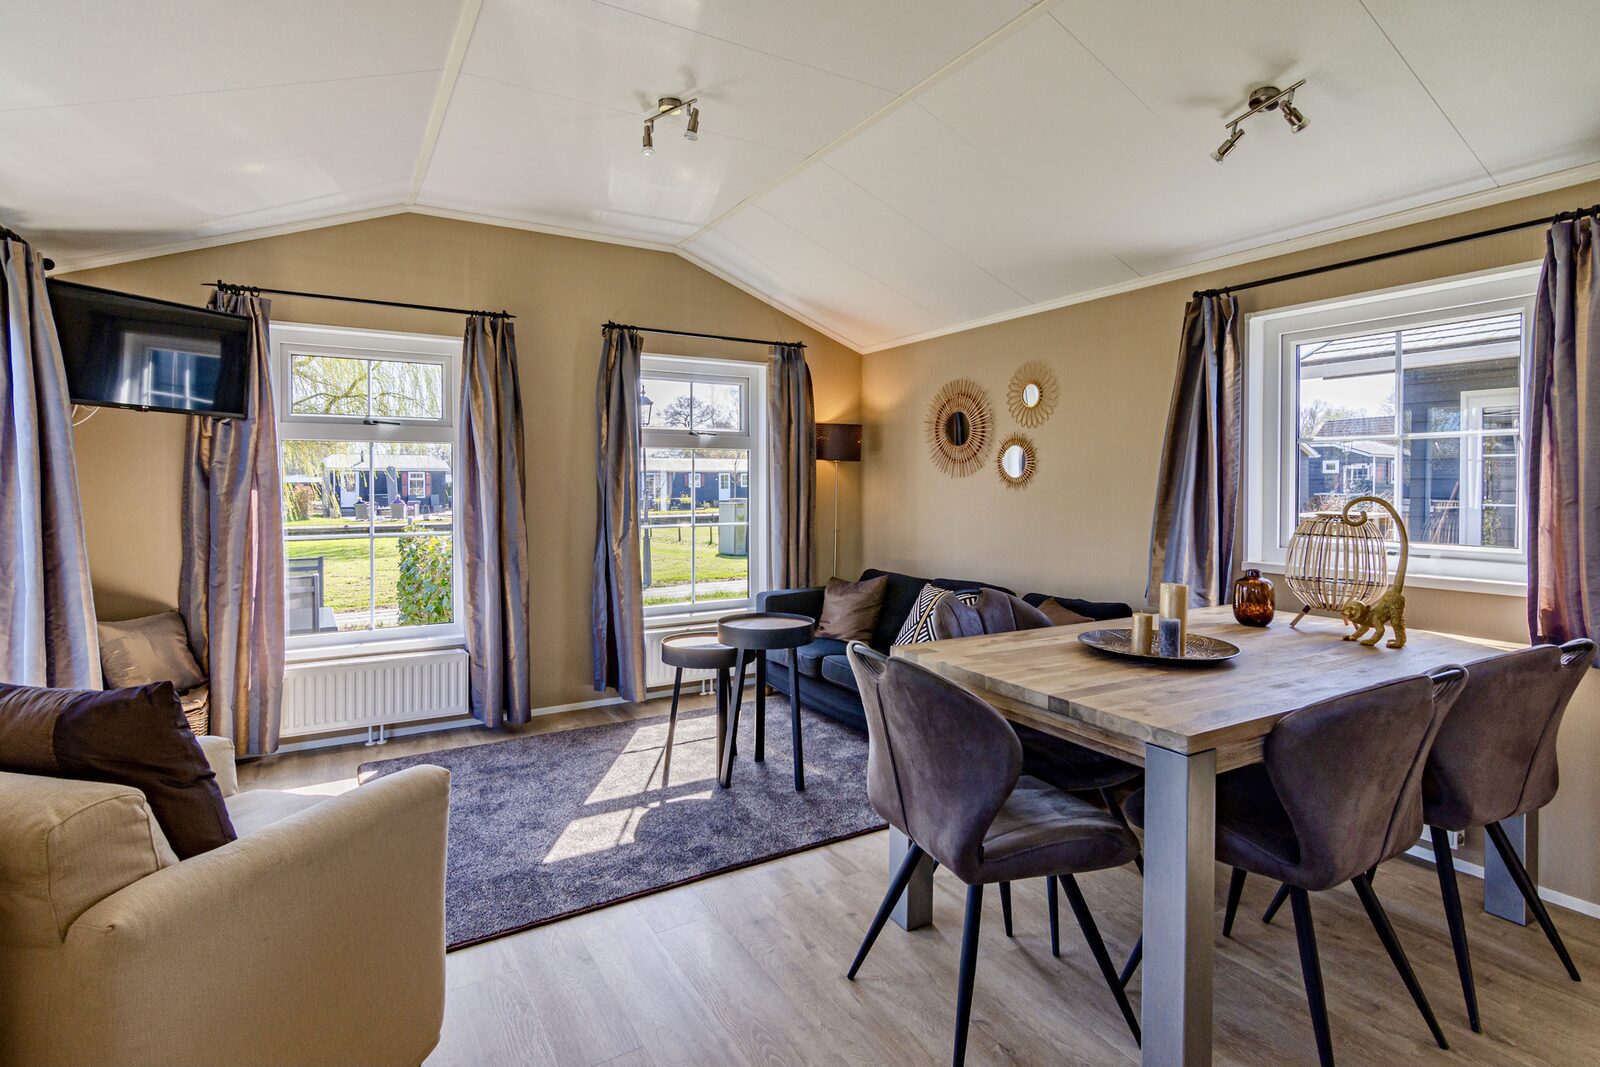 Chalet "'t Wiede" suitable for up to four guests